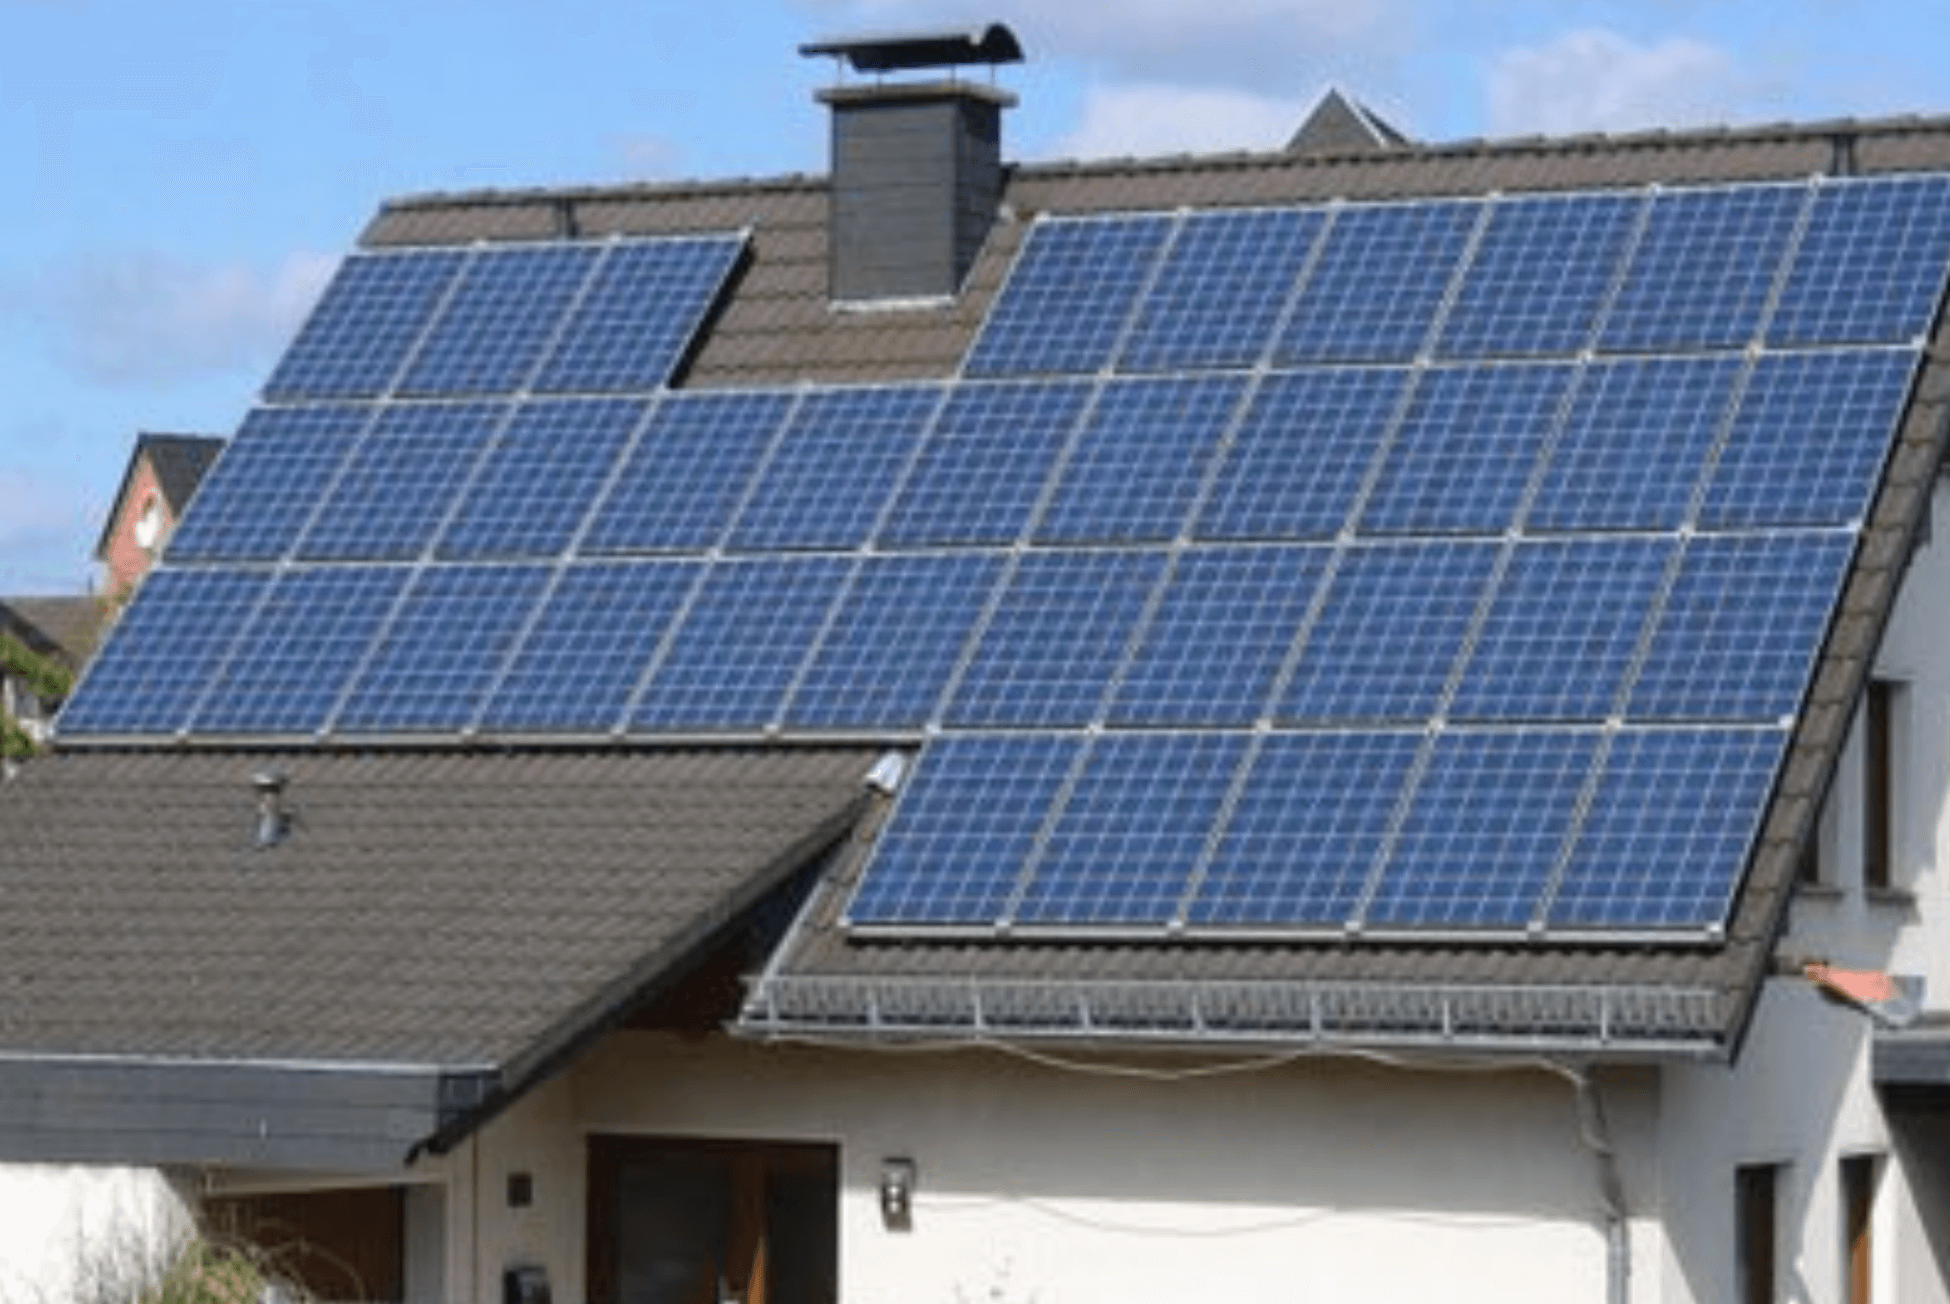 Photovoltaic power generation technology